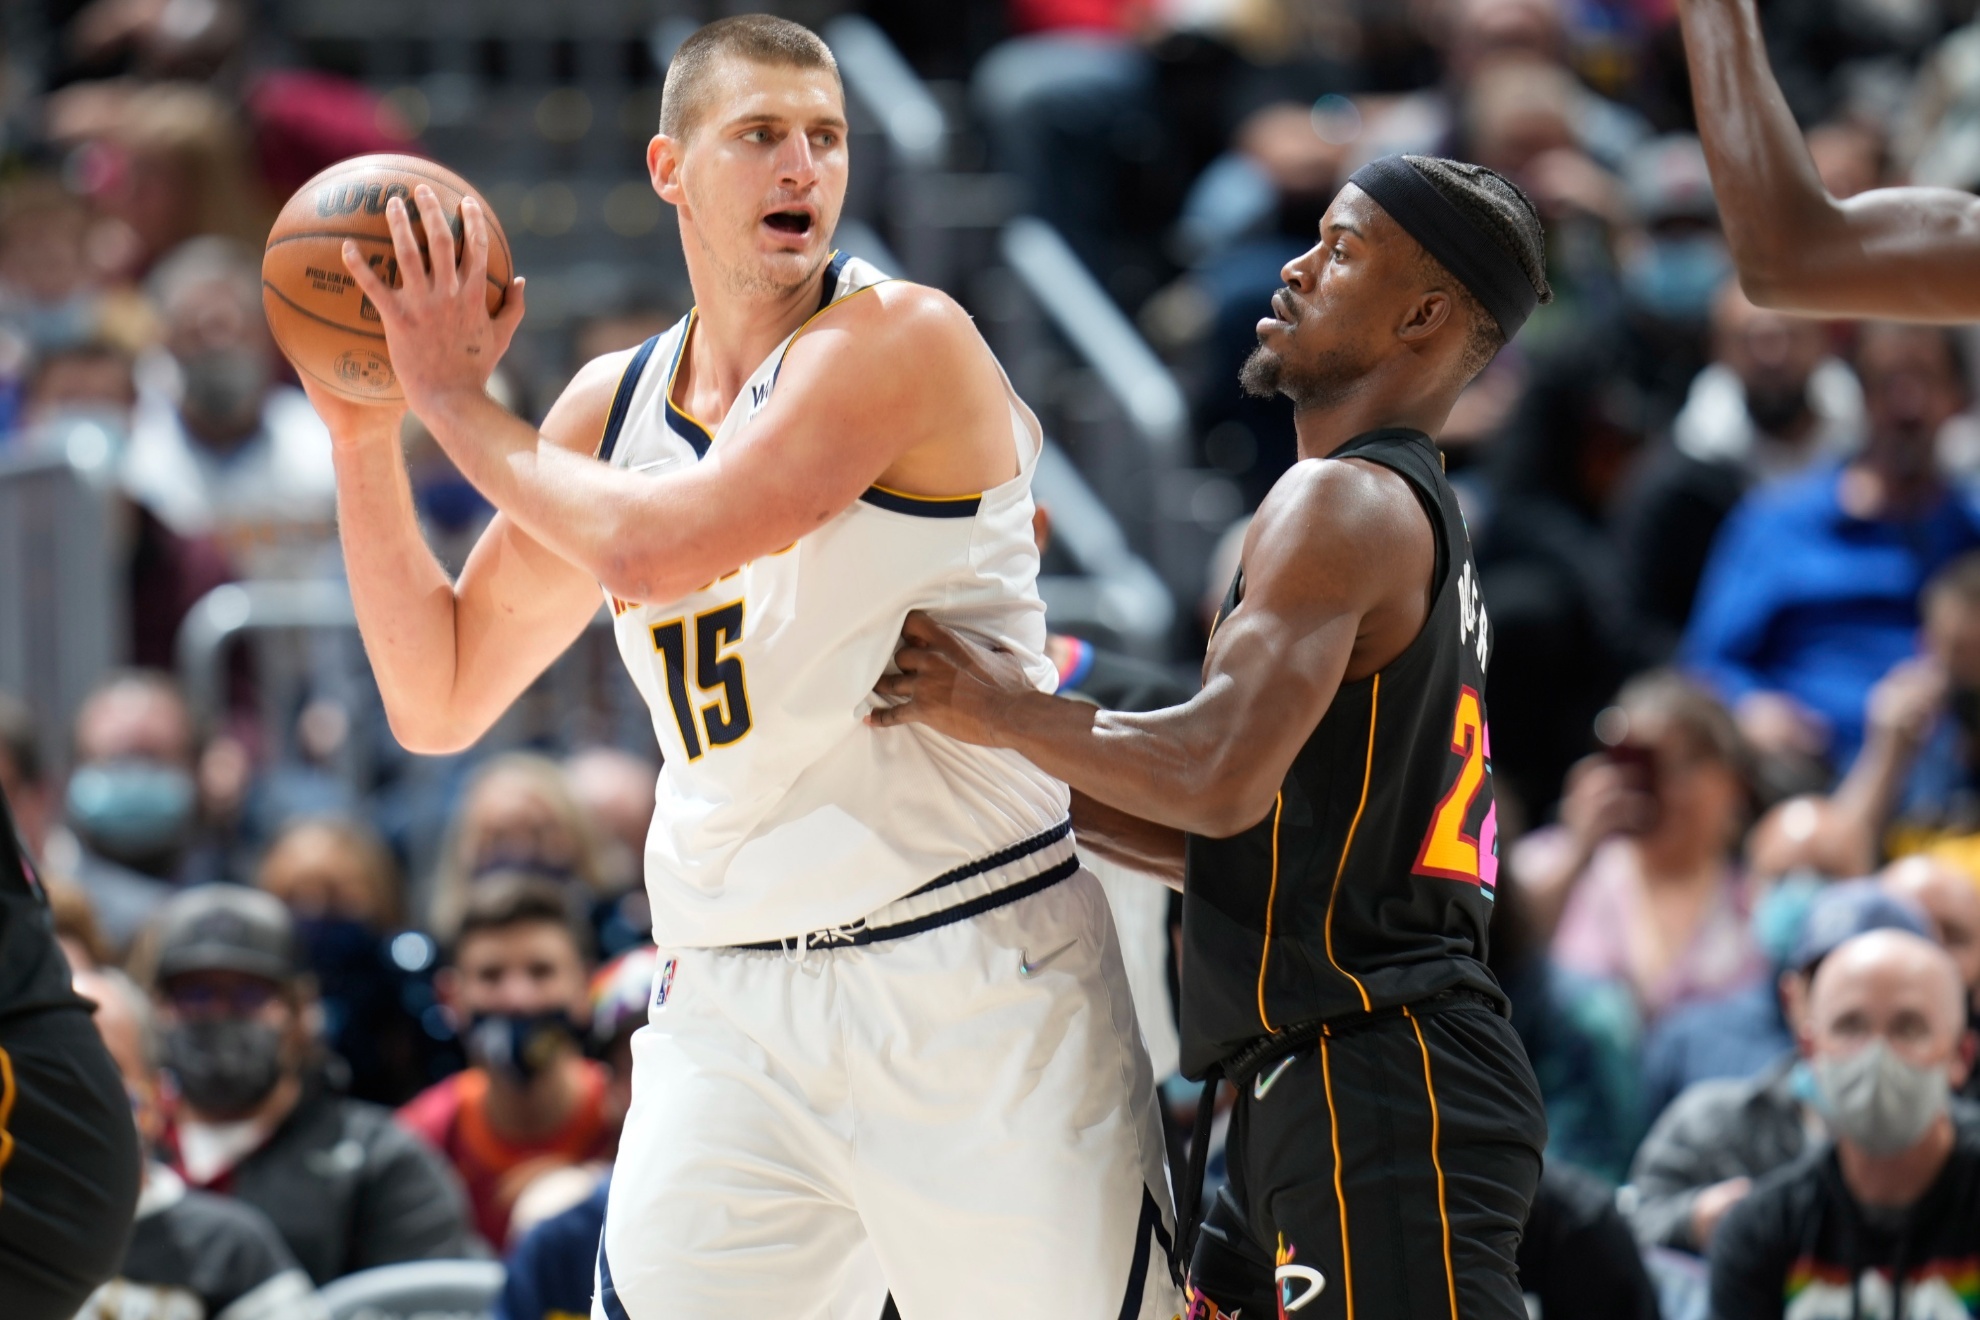 Klan taske Ulempe There's no beef with Nikola Jokic for the Heat-Nuggets 2021 altercation,  Jimmy Butler assures... | Marca